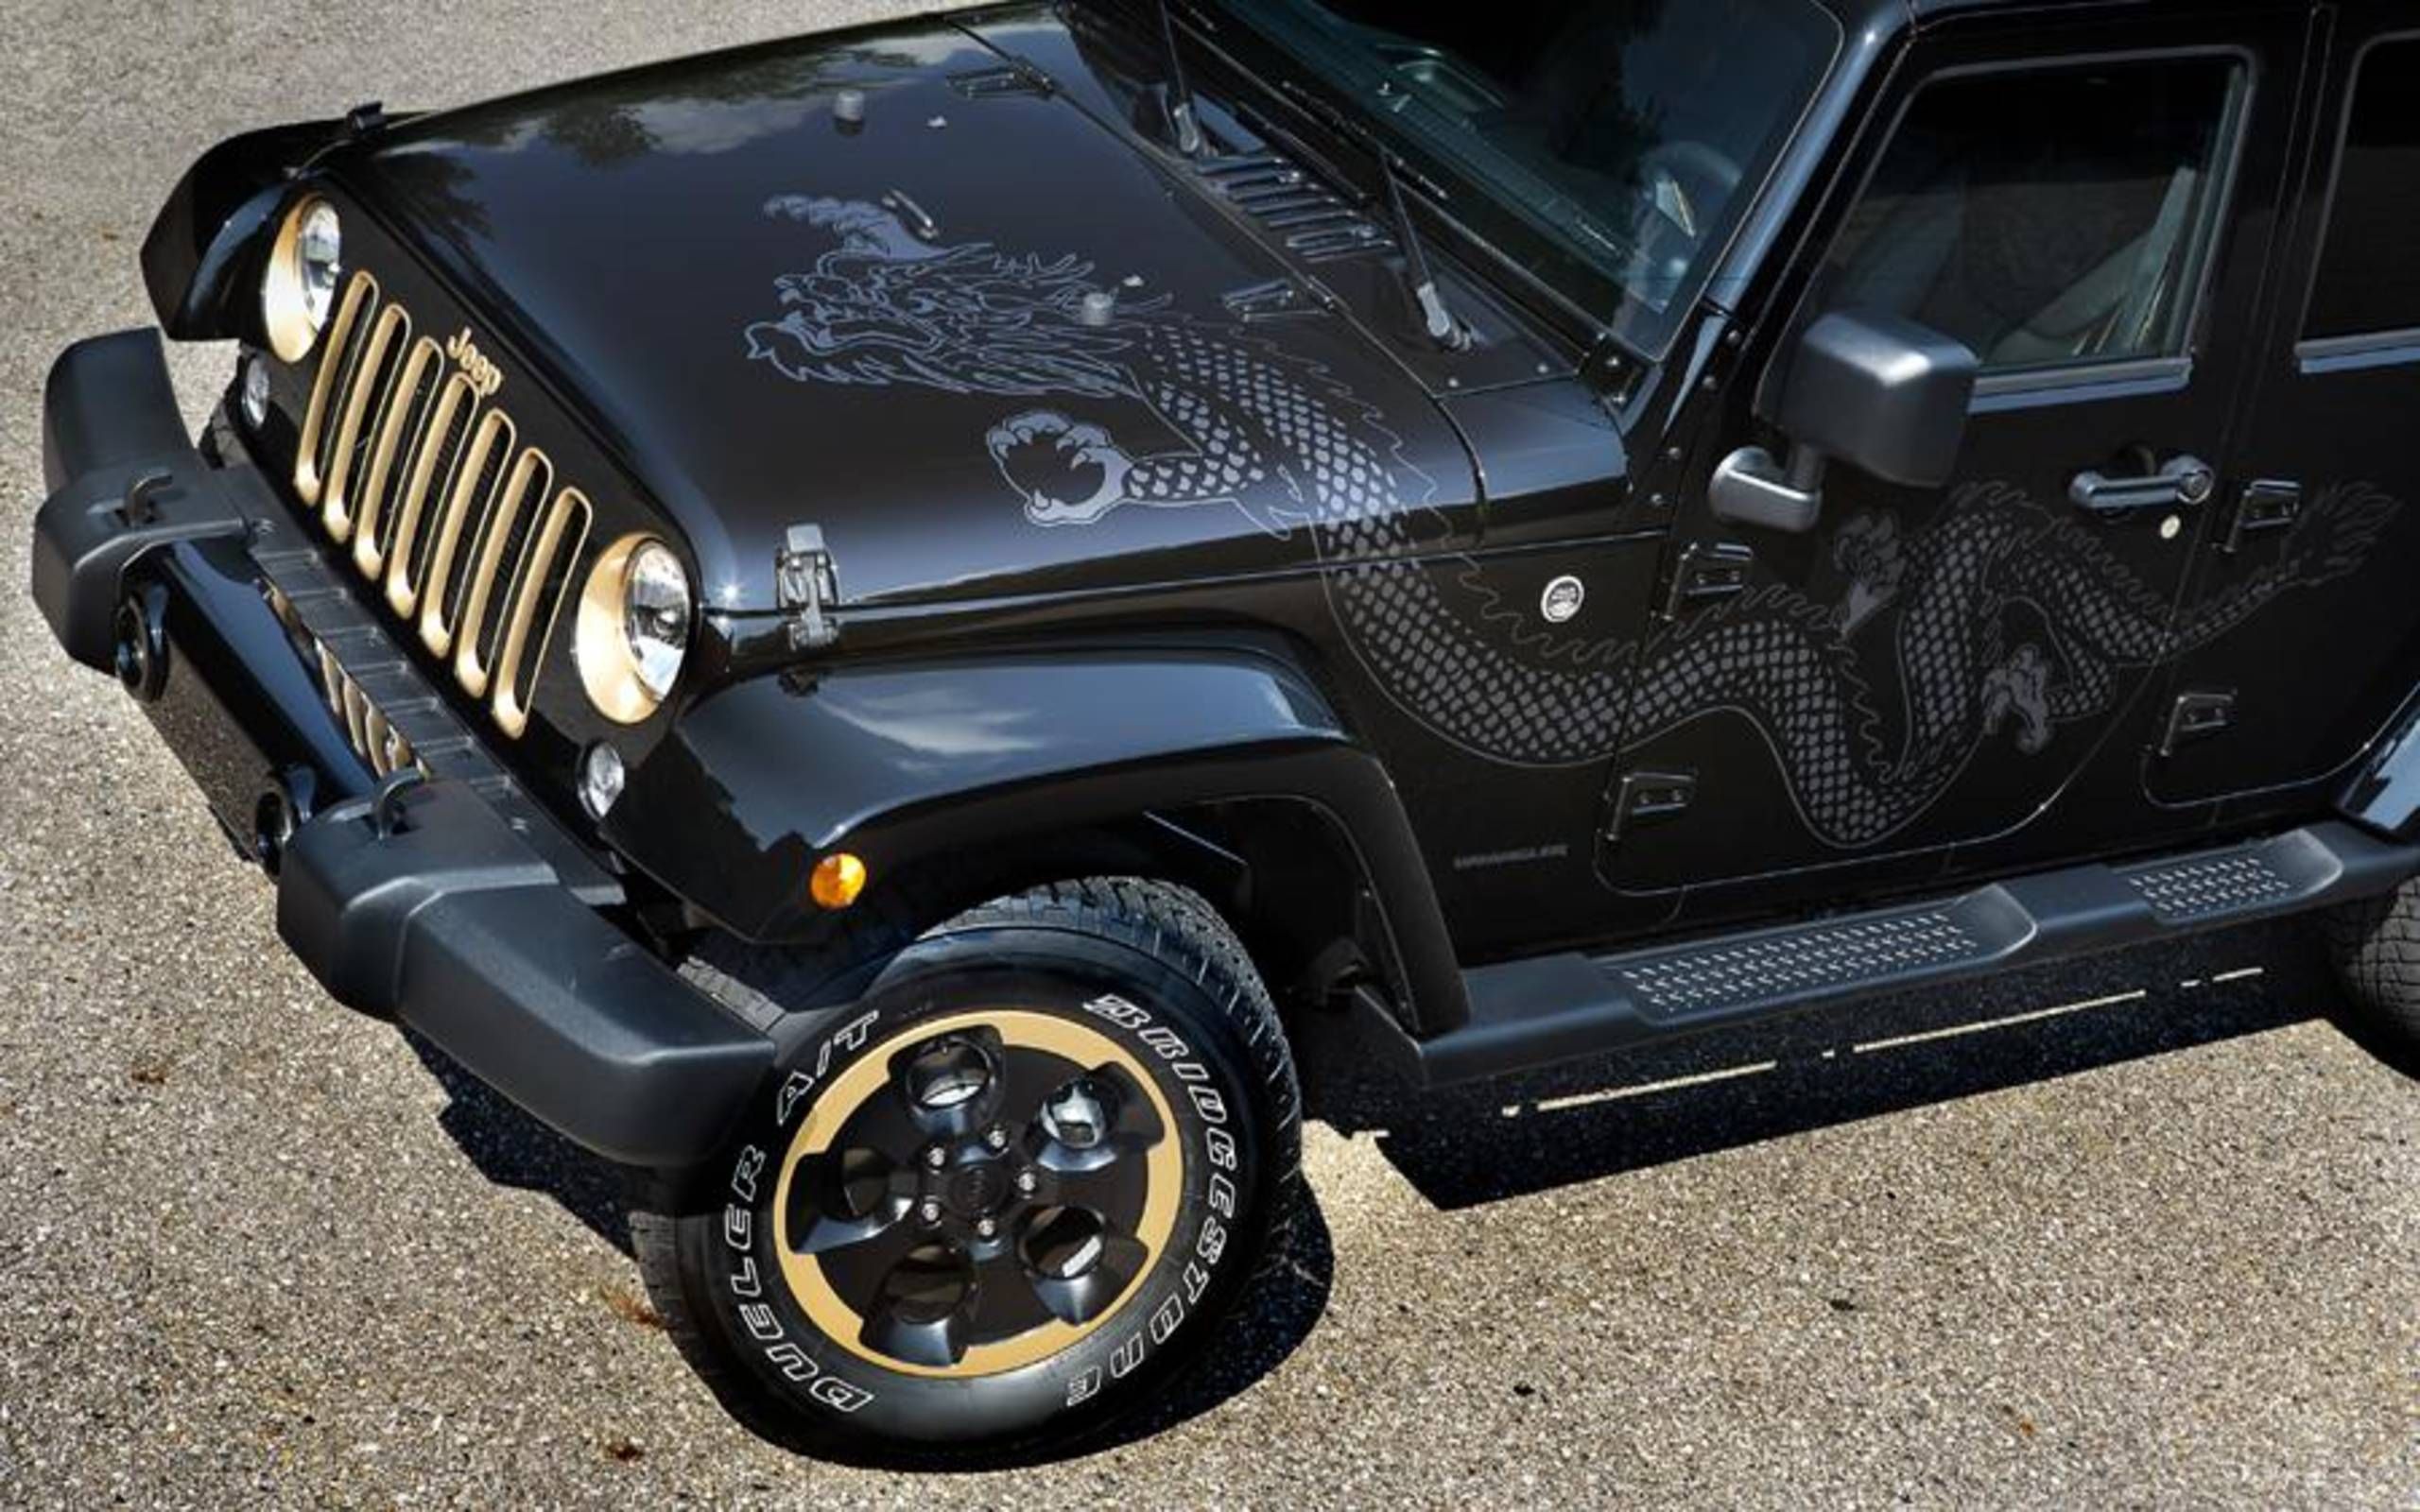 2014 Jeep Wrangler Unlimited Dragon Edition review notes